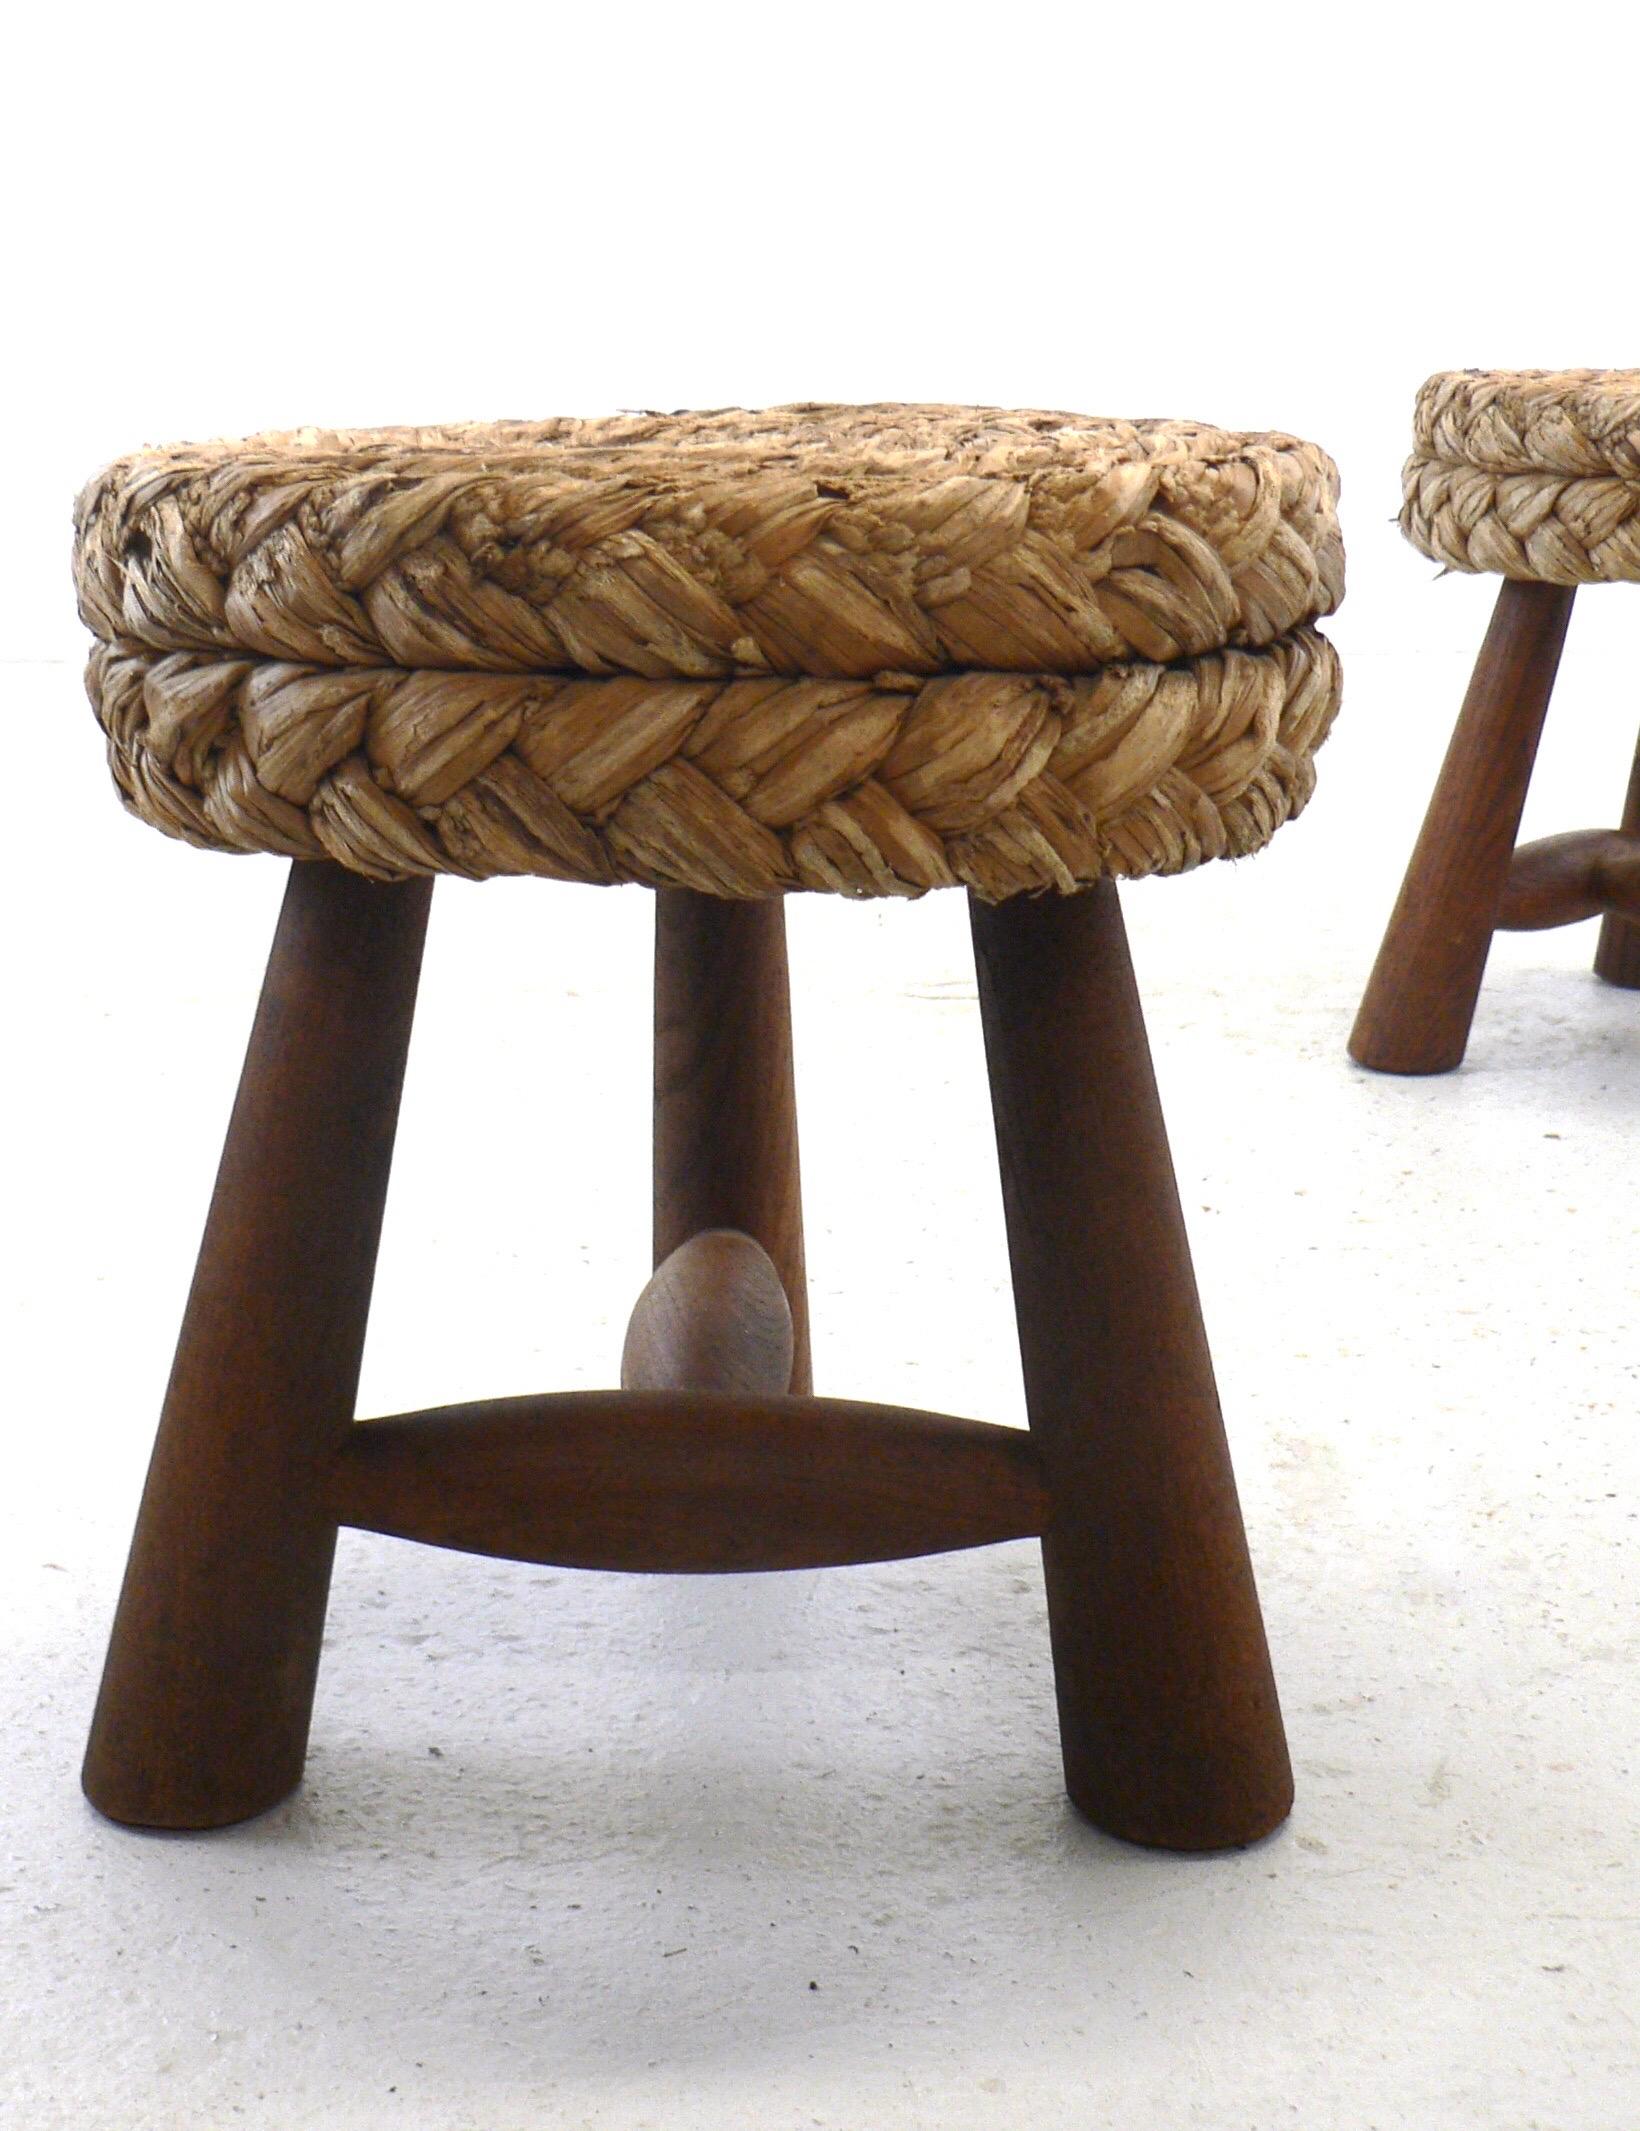 French Set of 2 stools designed by Adrien Audoux and Frida Minet - France -1950 For Sale